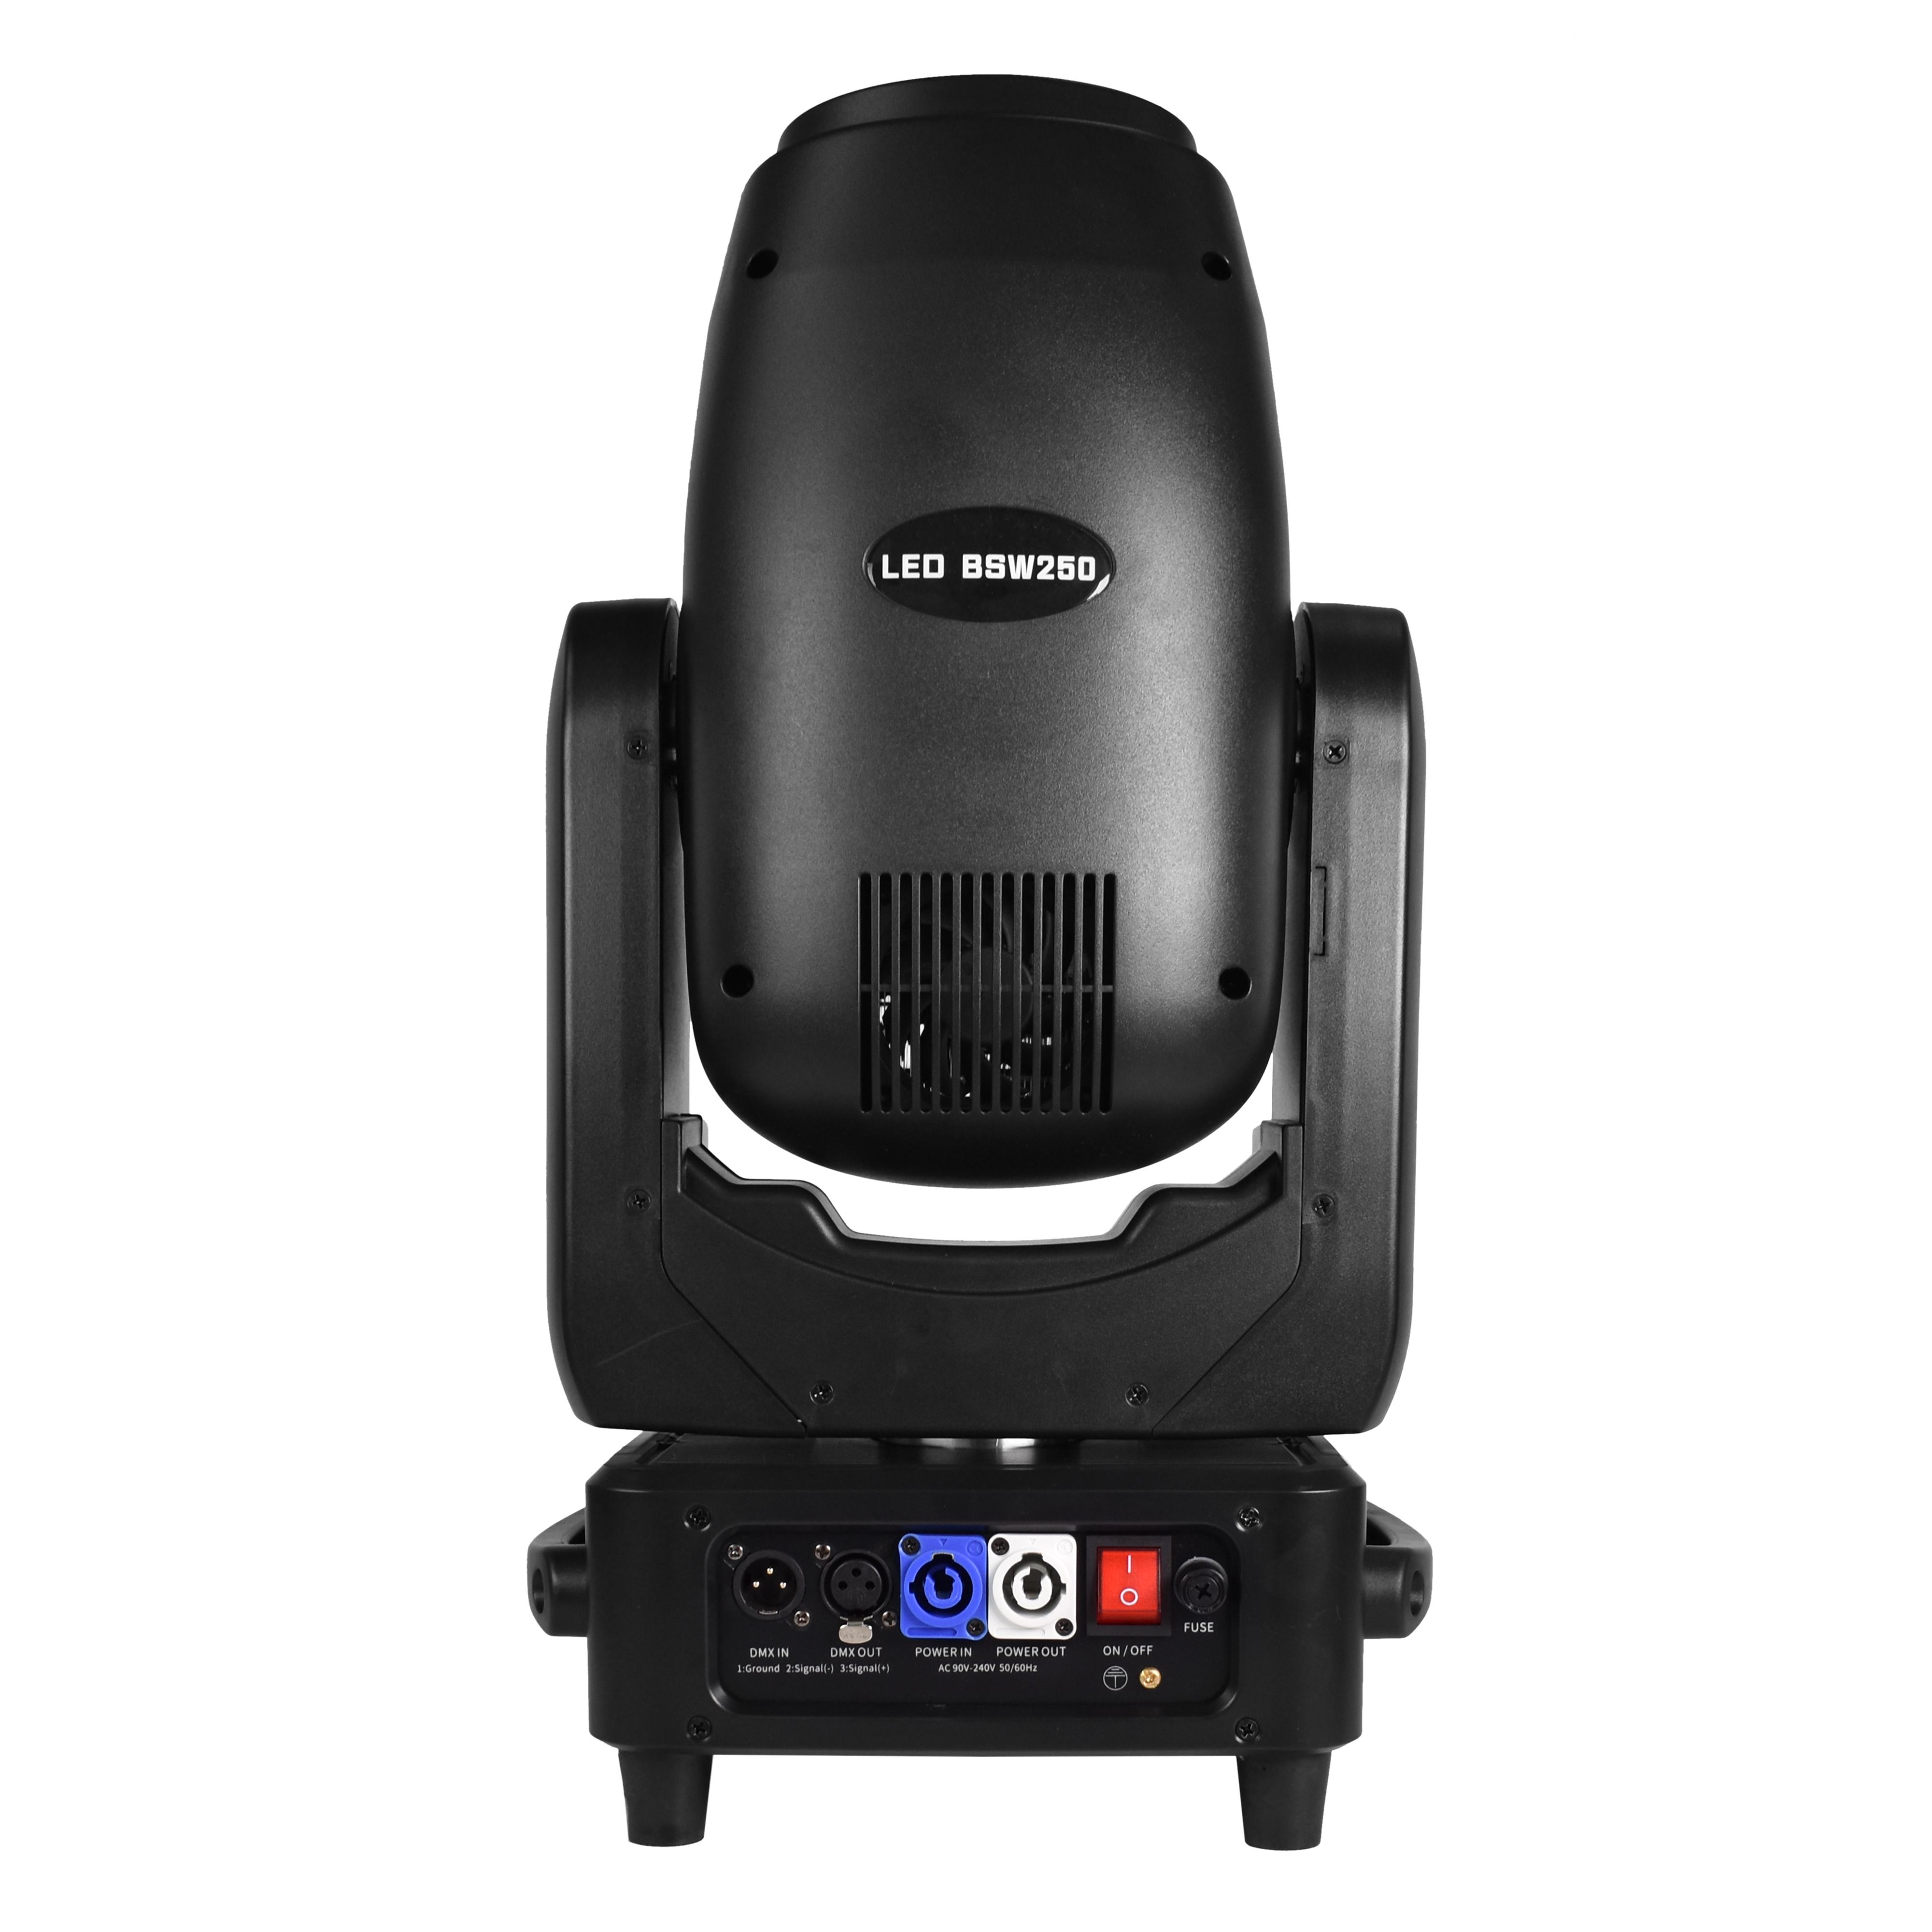 Moving Head Waterproof Tiptop Stage Lights Moving Head Effects Led Stage Light Equipment